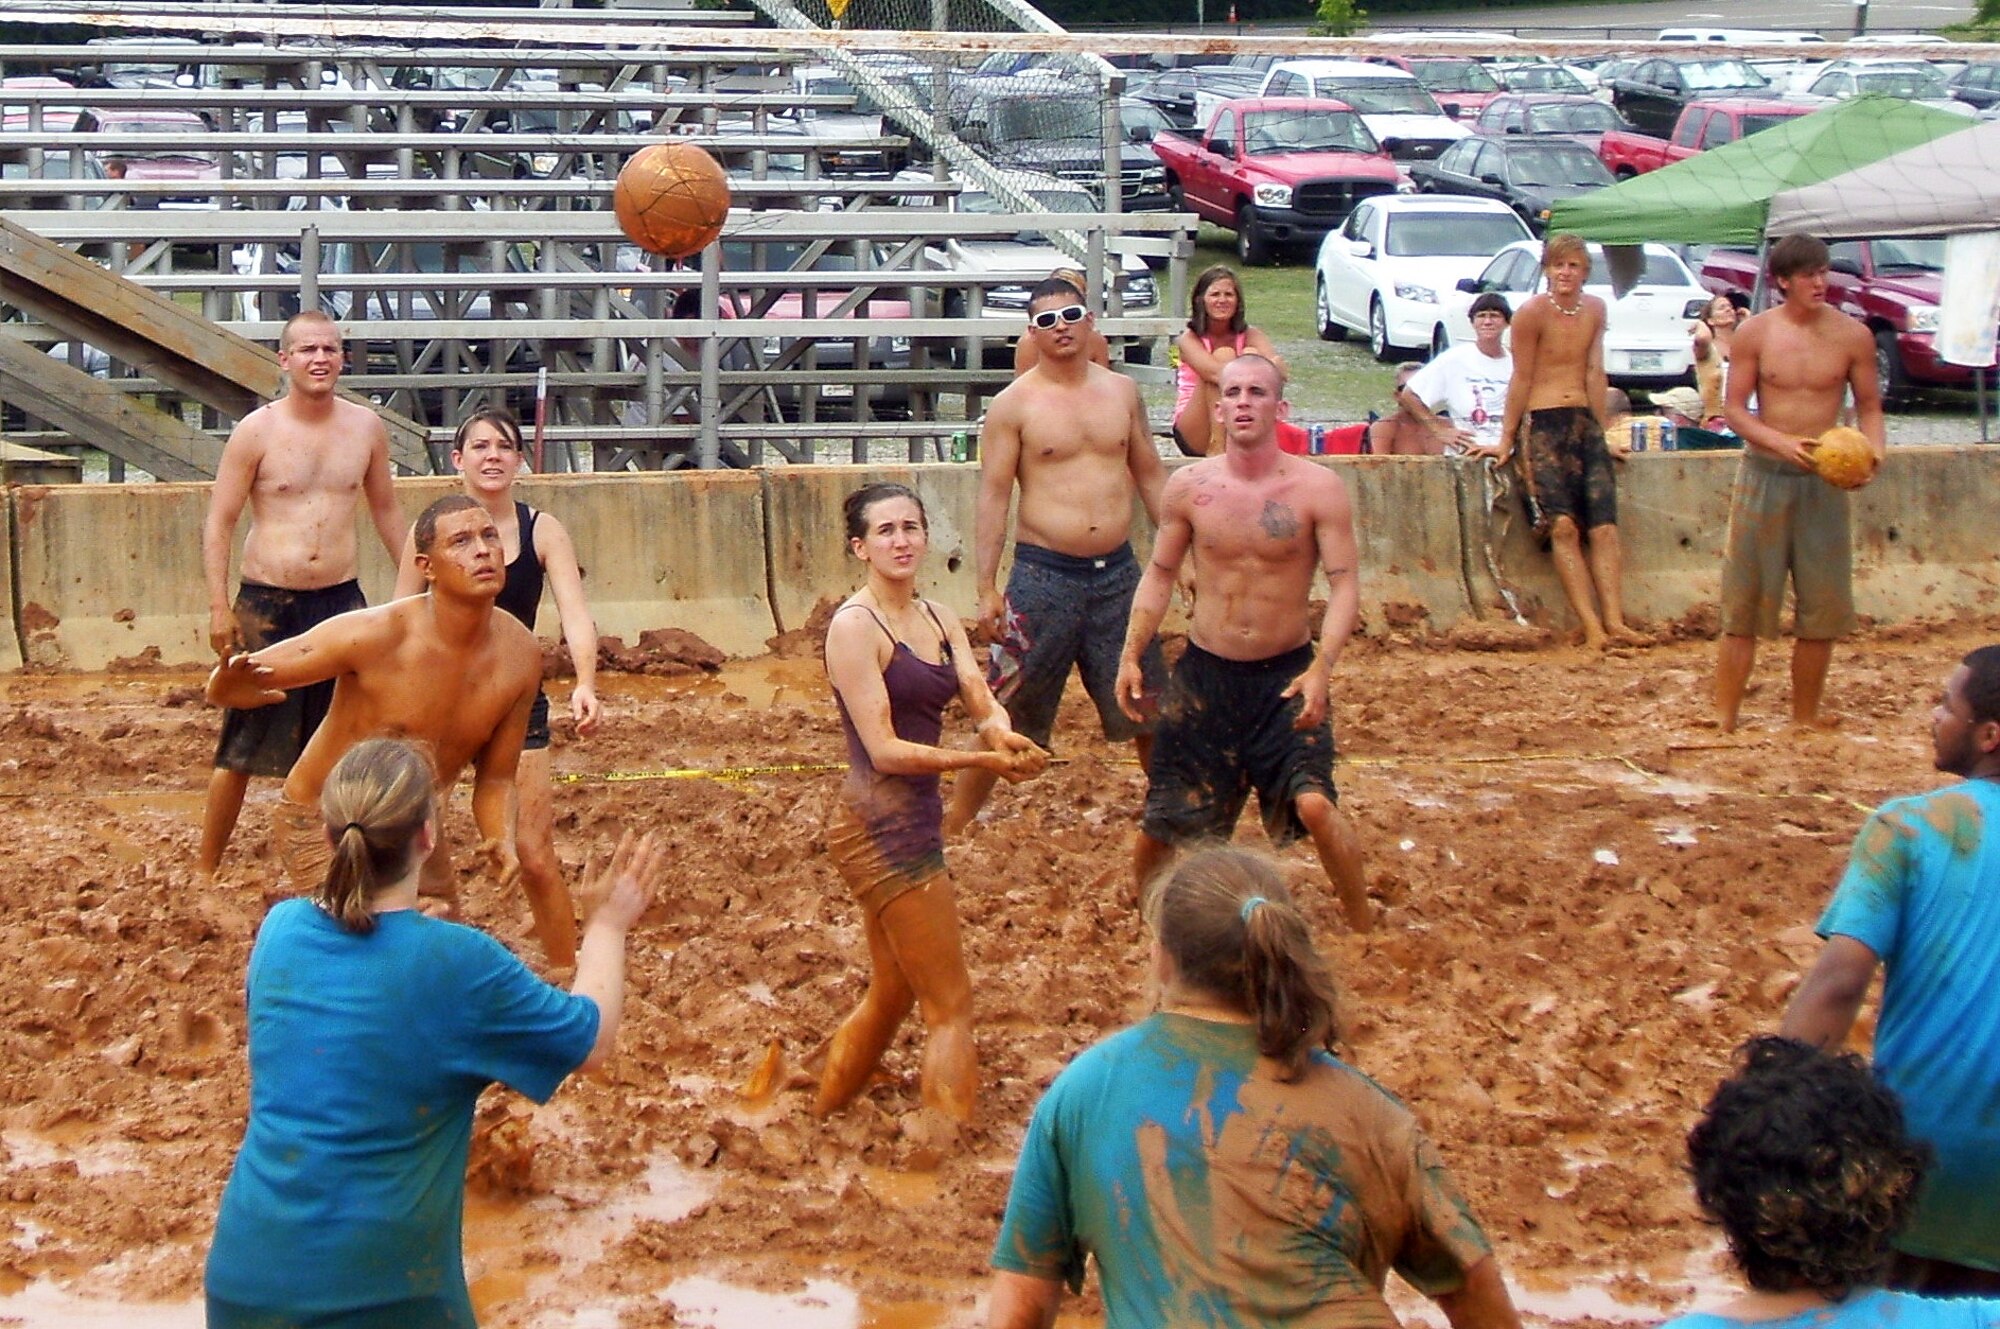 MCGHEE  TYSON ANGB, Tenn. - Students of The I.G. Brown Air National Guard Training and Education Center's Airman Leadership School Class 10-4 help raise more than $20,000 for the Epilepsy Foundation of East Tennessee during the organization's annual Mud Volleyball Tournament at Chilhowee Park in Knoxville, June 26,2010. (U.S. Air Force photo by Master Sgt. Michael Moore/Released)